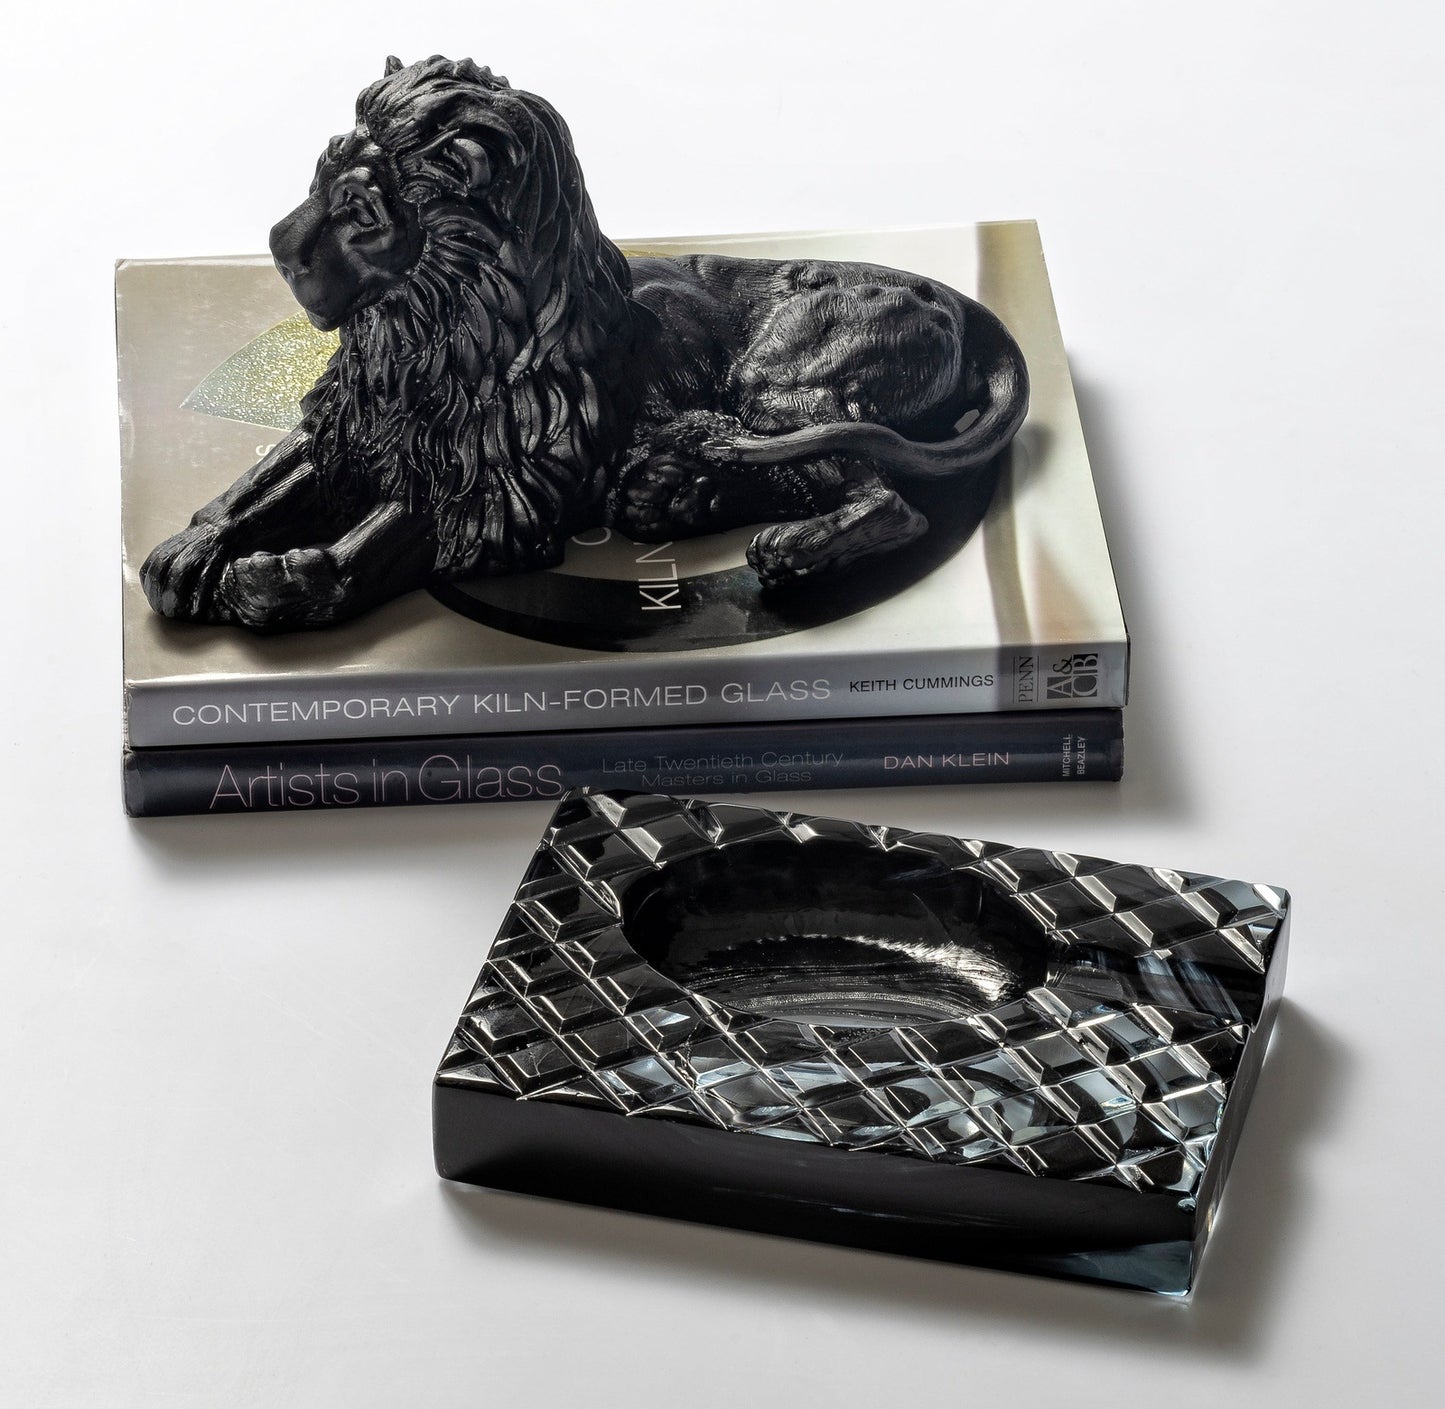 Lion Premium Glass Sculpture Black on a stack of books